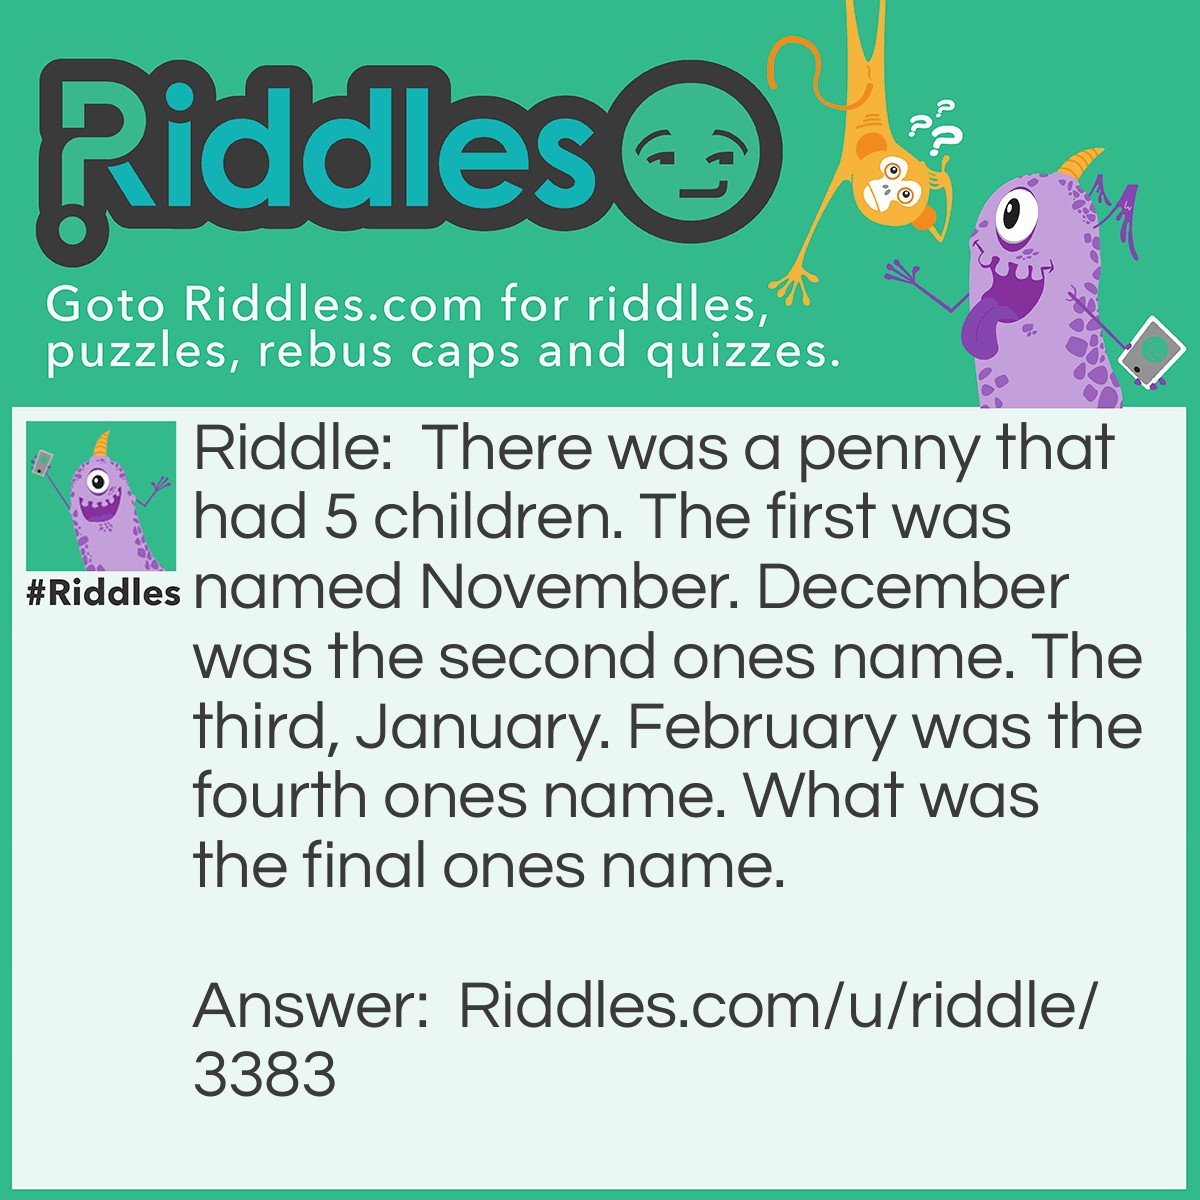 Riddle: There was a penny that had 5 children. The first was named November. December was the second ones name. The third, January. February was the fourth ones name. What was the final ones name. Answer: The fifth ones name is what.